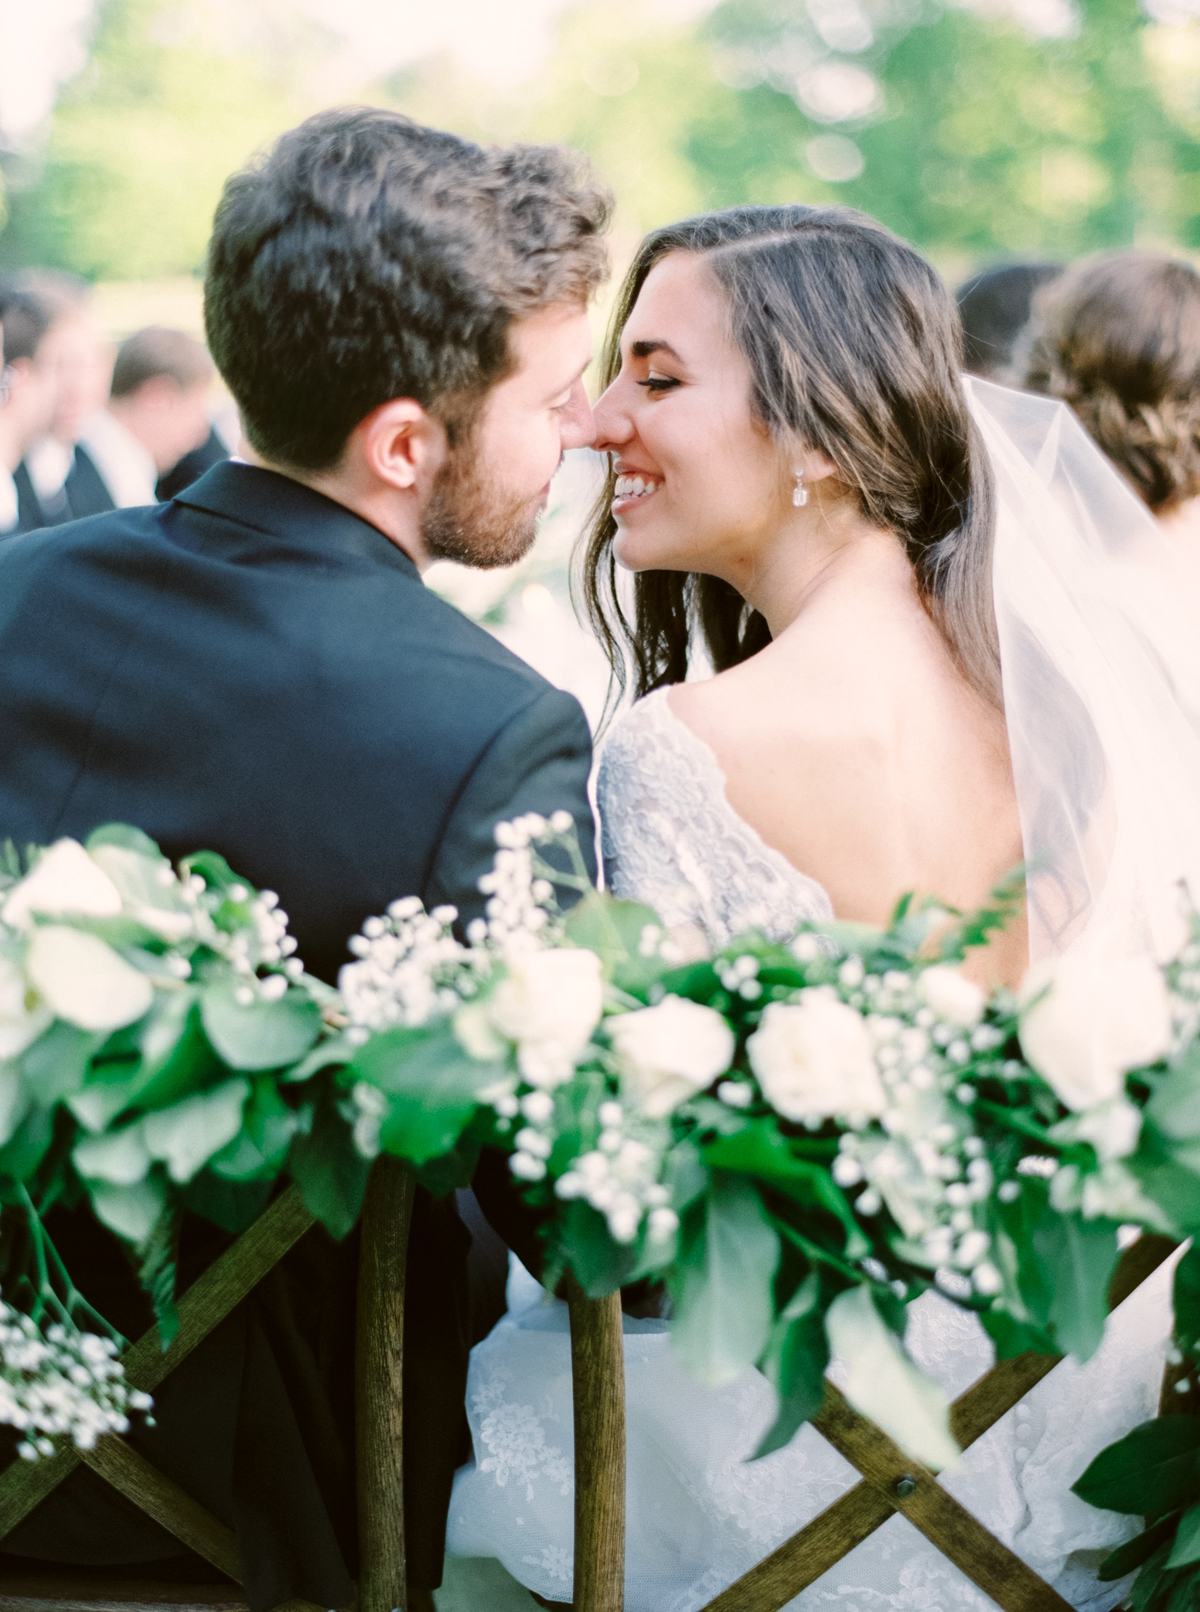 Beautiful Relationships Start as Buds and then Bloom: Madison and Michael's Elegant Estate Wedding as Featured in The Pioneer Issue